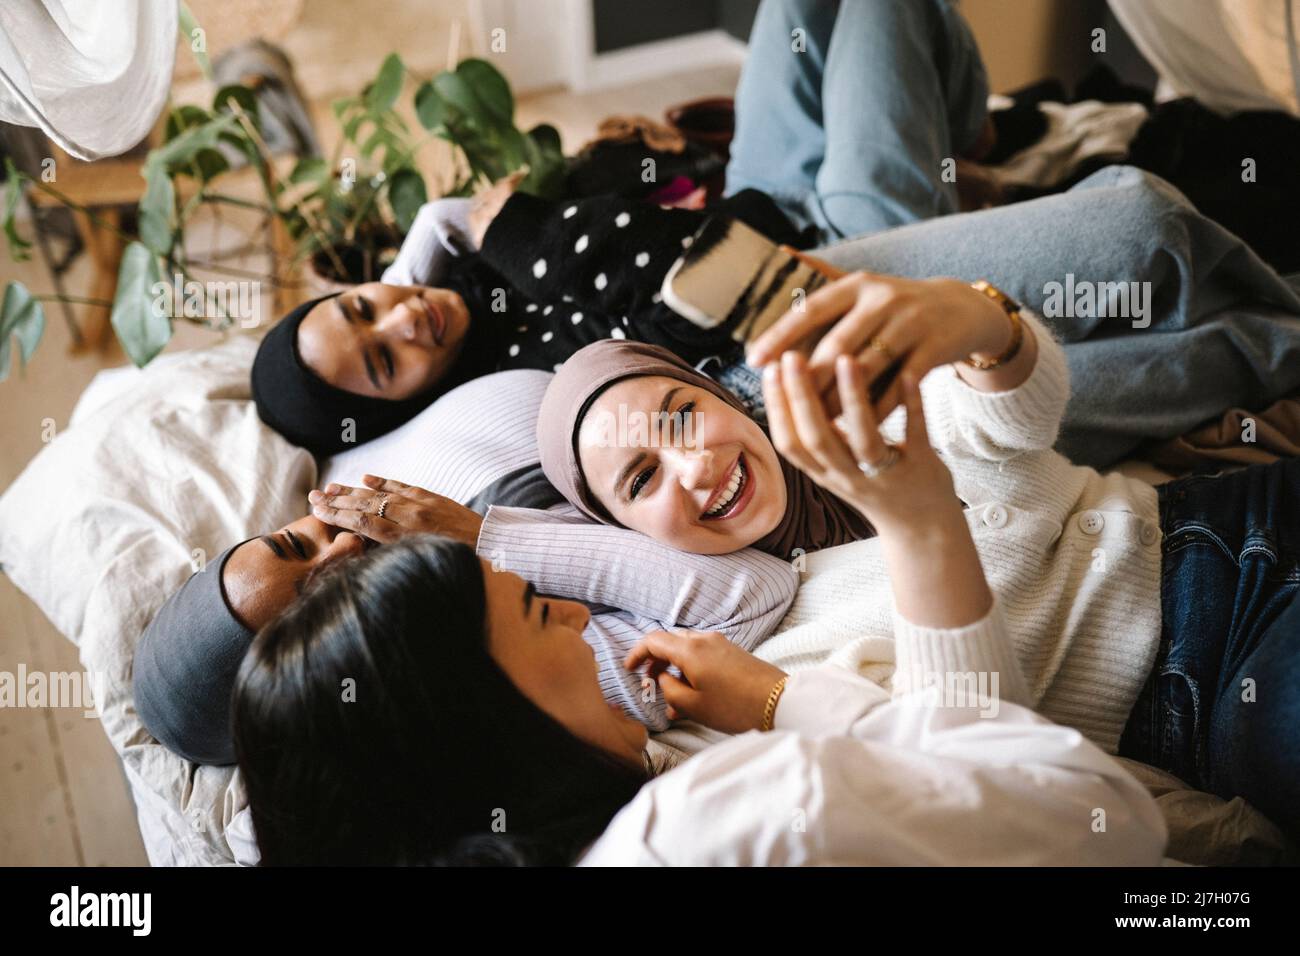 Happy woman wearing hijab taking selfie with friends lying on bed at home Stock Photo